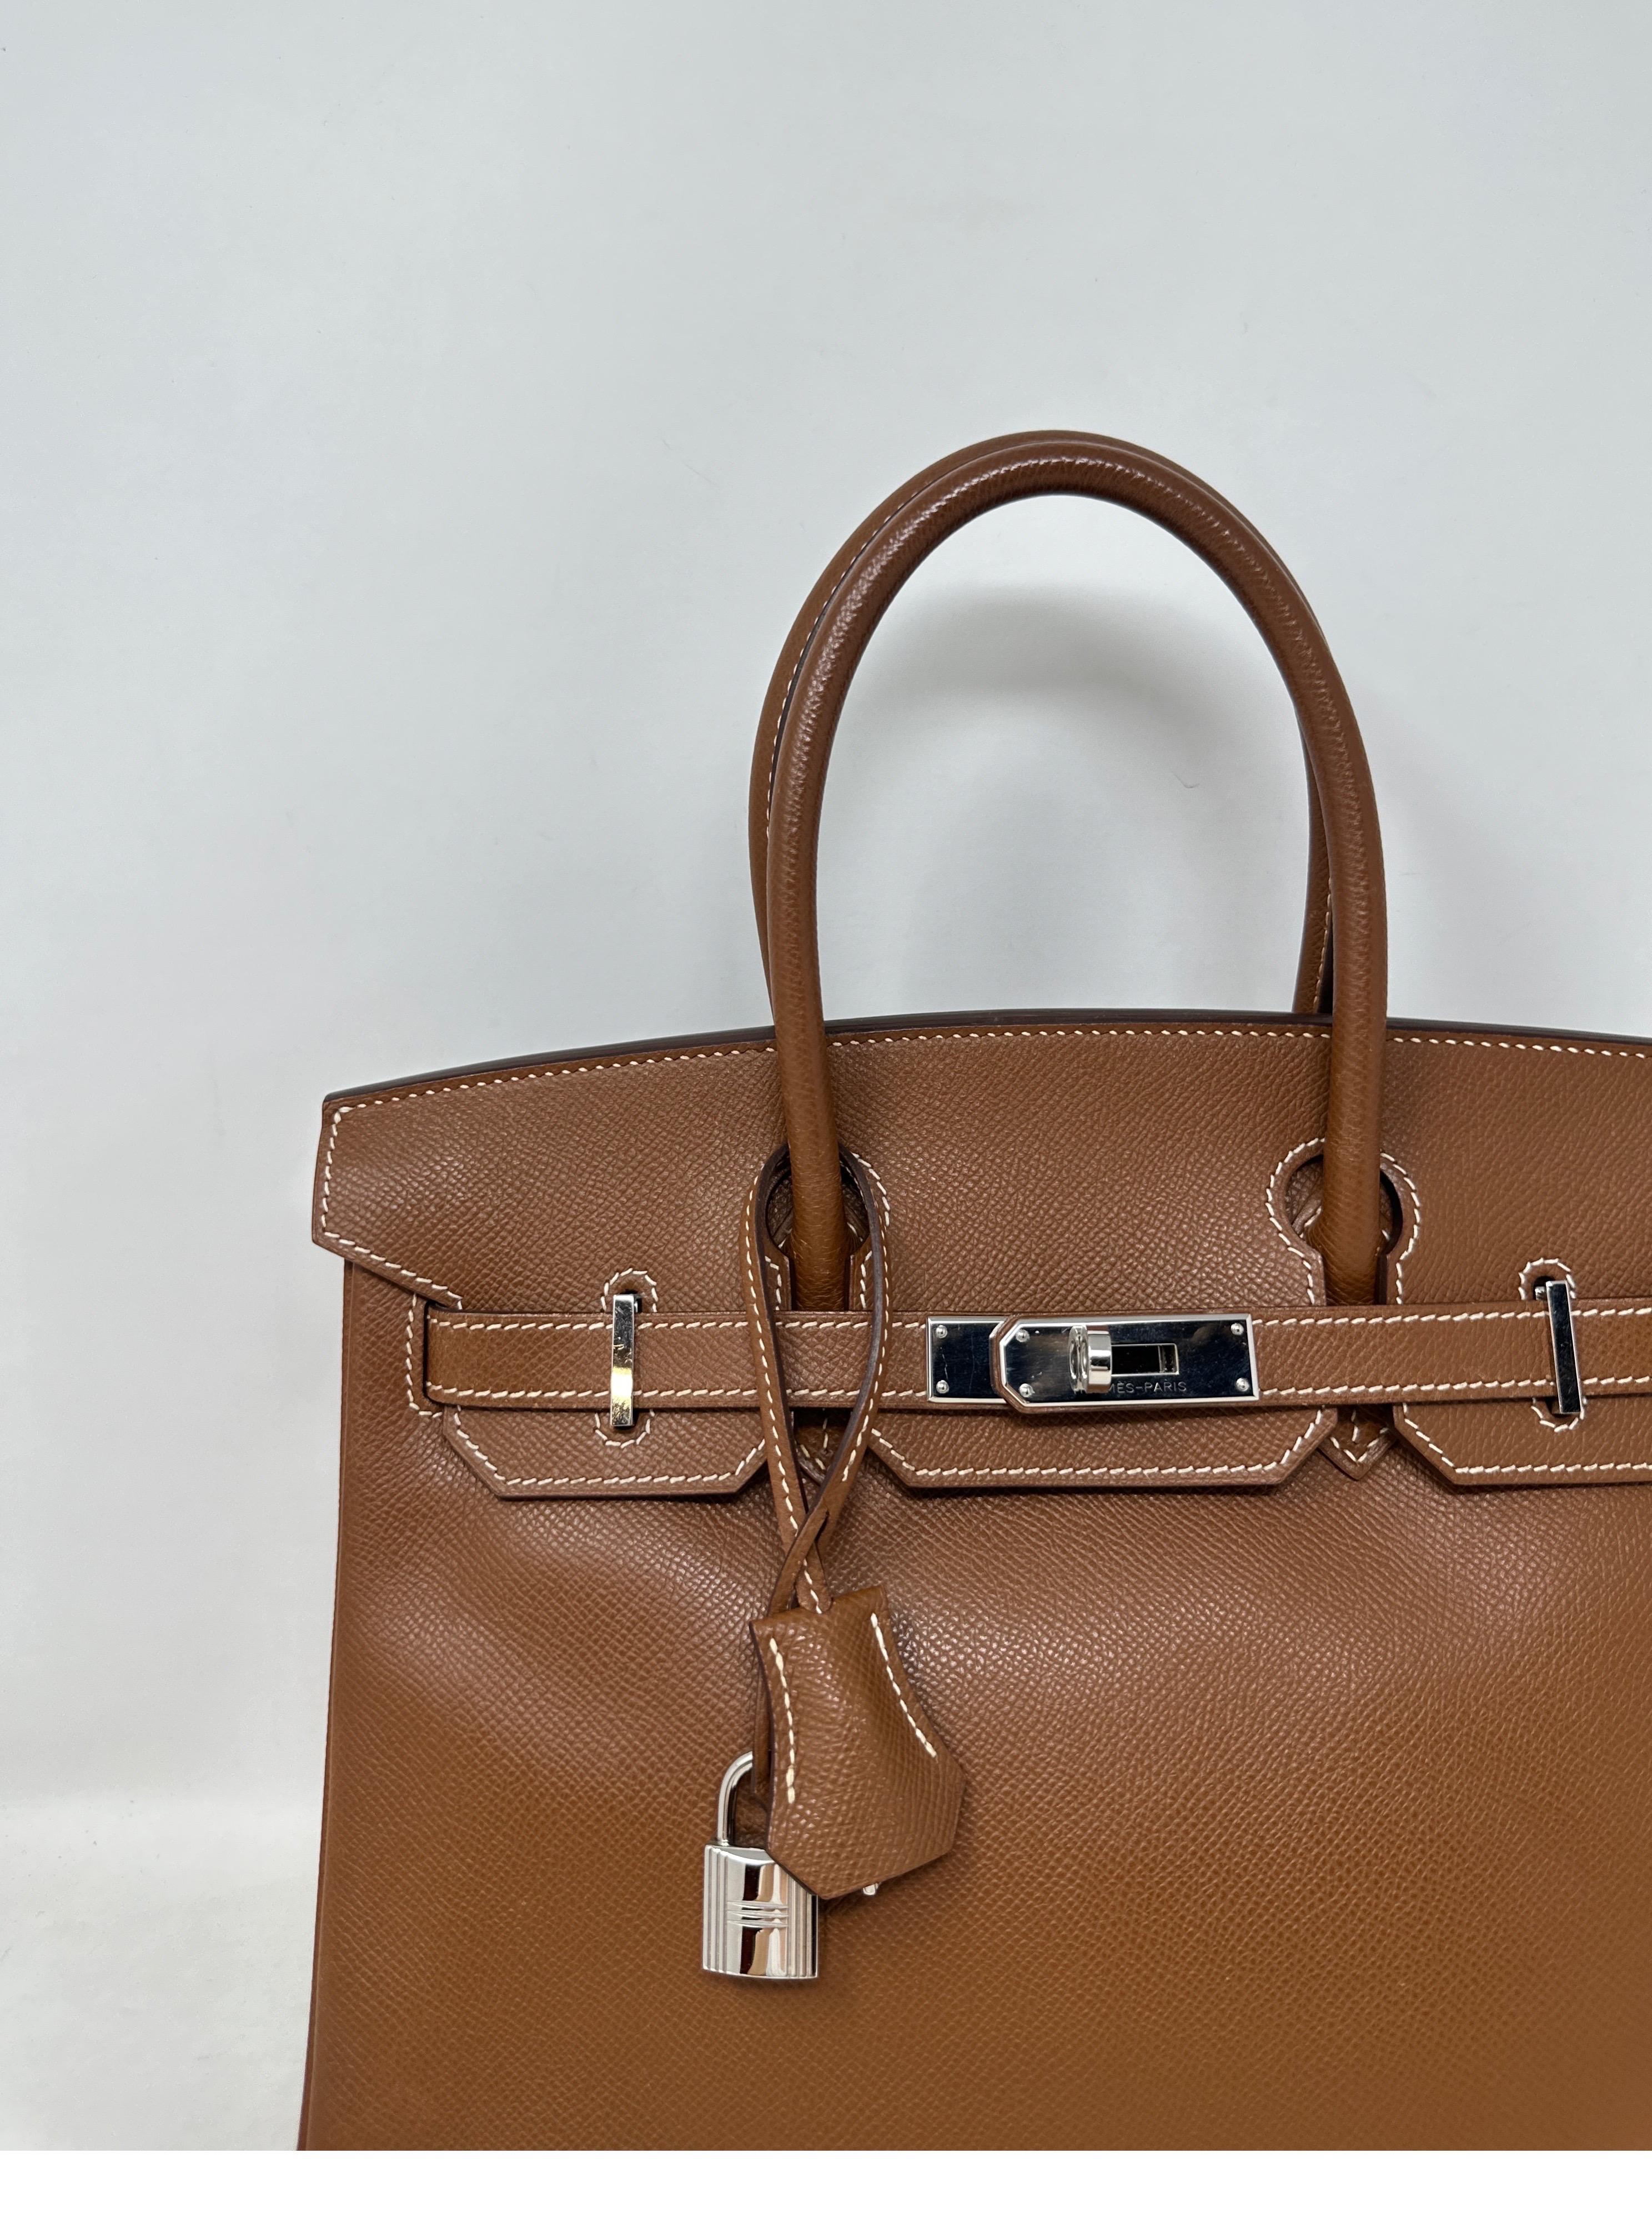 Hermes Birkin 30 Gold Bag  In Excellent Condition For Sale In Athens, GA